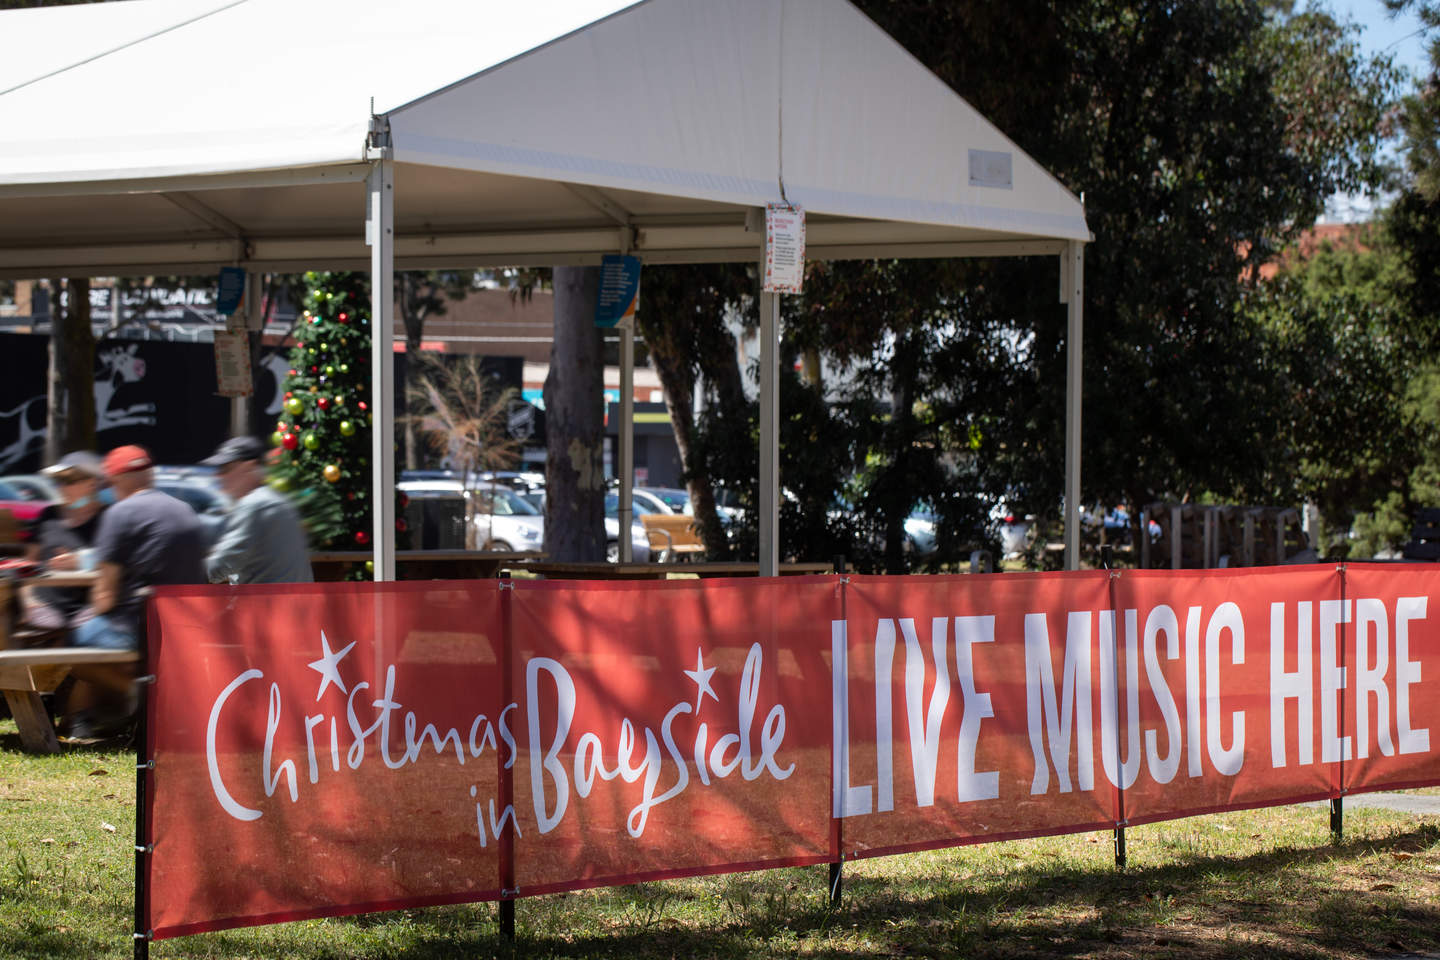 Chrismas in Bayside Live Music Here banner in front of people sat on benches.